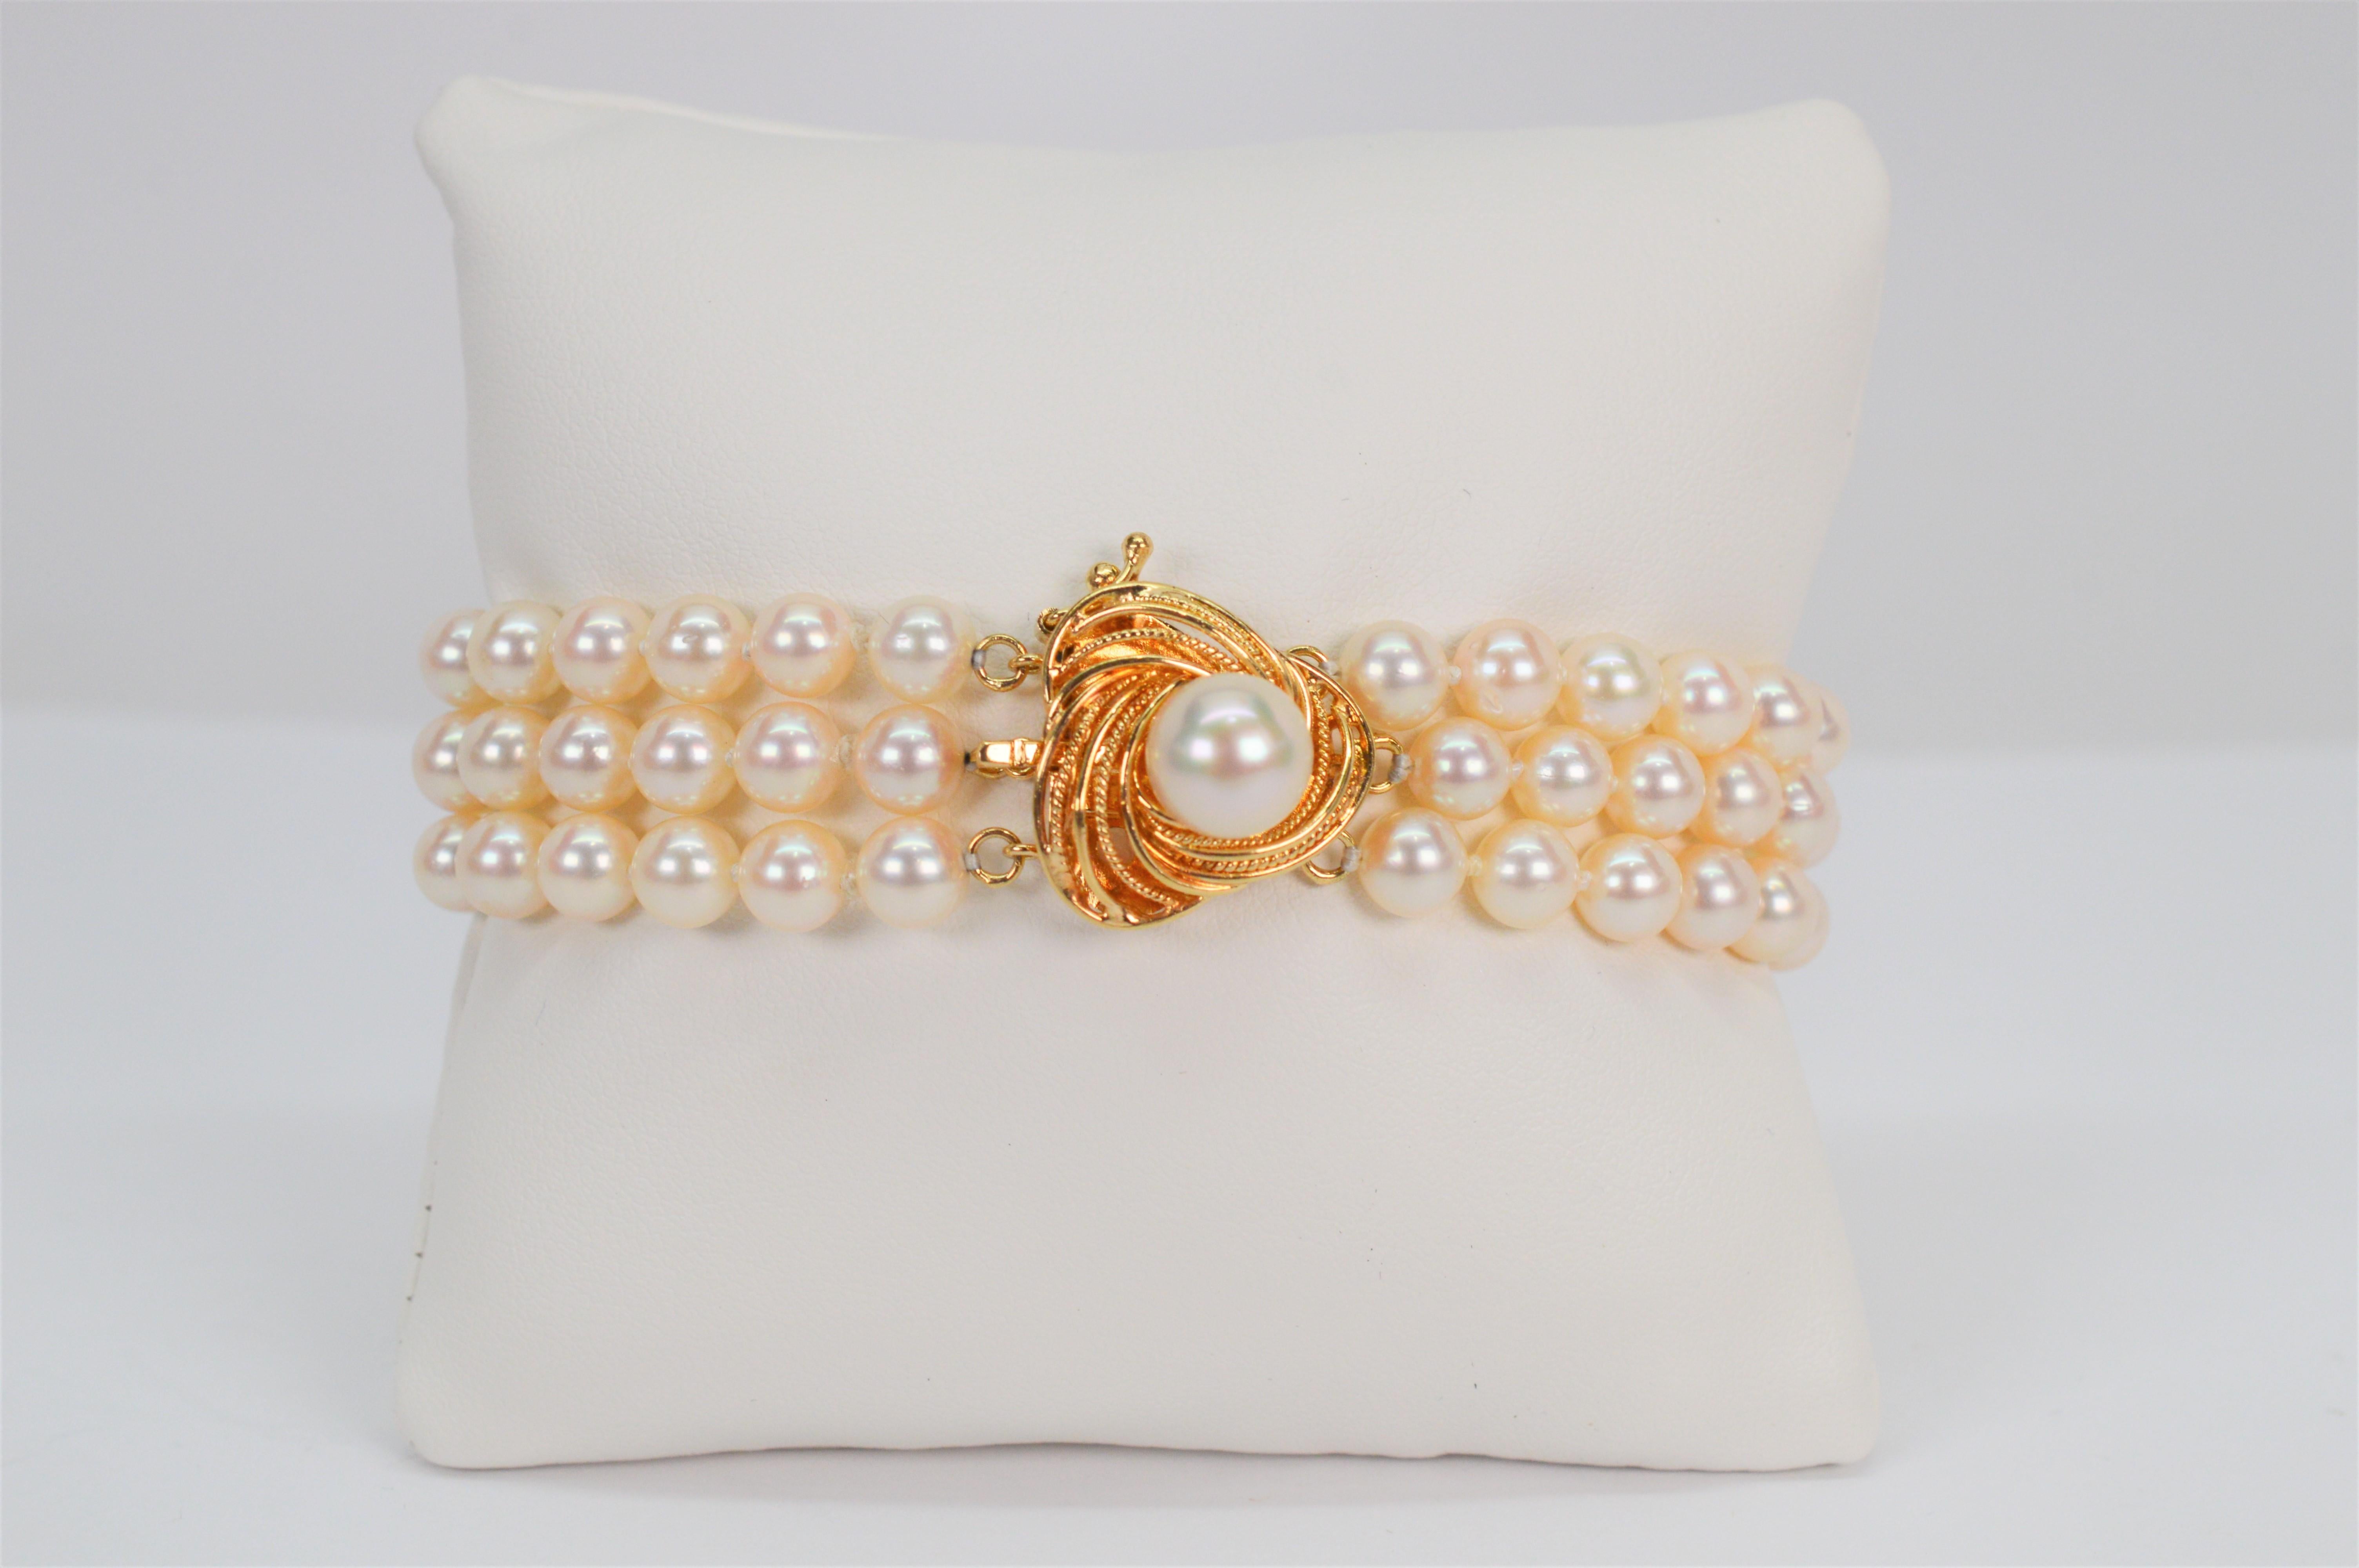 With stylish flair, this elegant beaded bracelet features a contemporary decorative clasp with one lustrous 8.5mm round AAA Akoya Pearl nested in swirls of 14 karat yellow gold. The clasp is an elegant focal point, measuring 5/8 which also functions